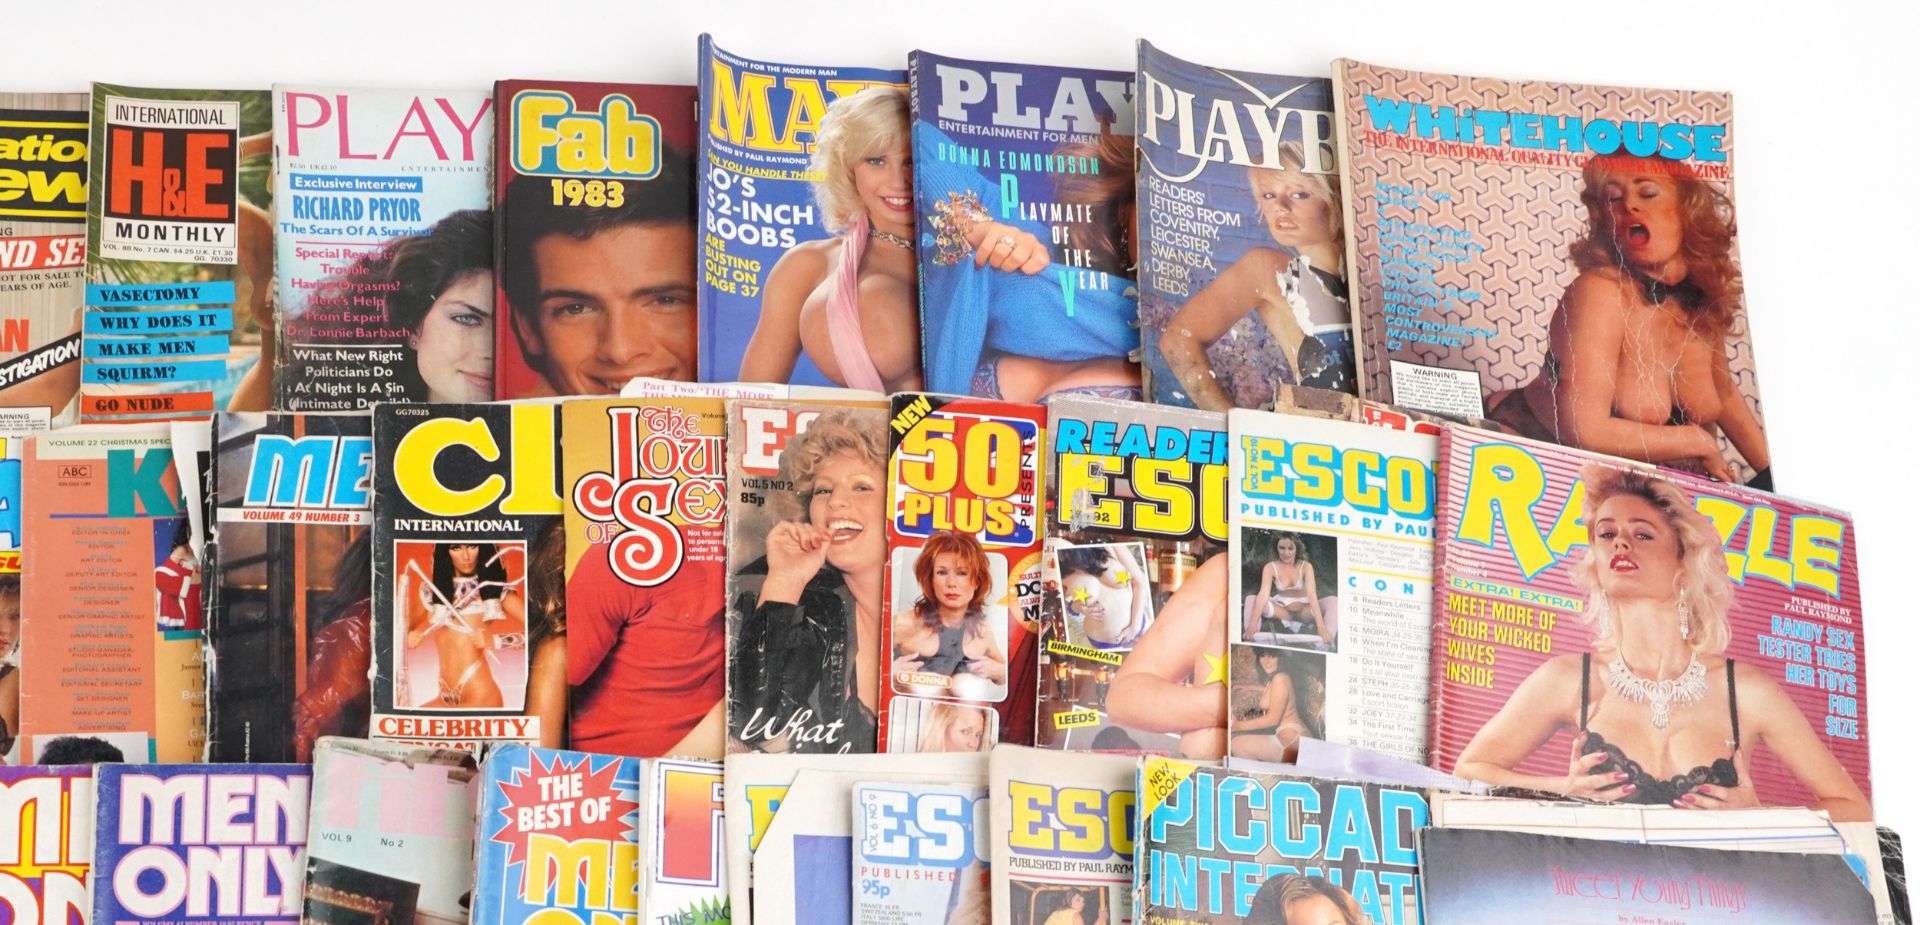 Large collection of erotic magazines including Mayfair, Playboy, Playgirl and International H & E - Bild 3 aus 5